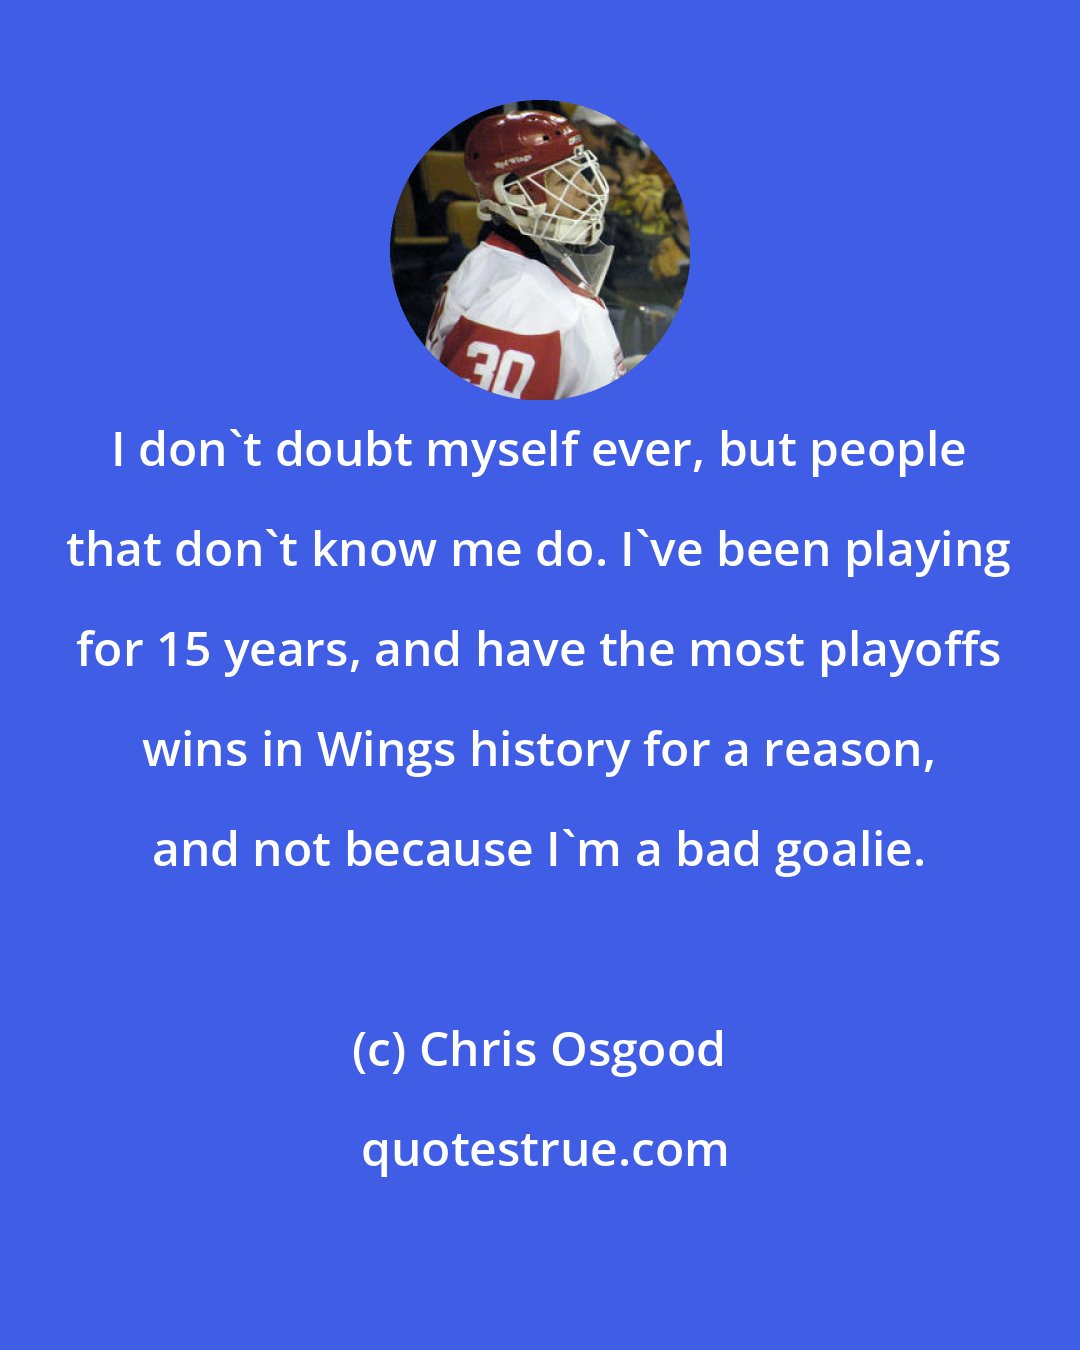 Chris Osgood: I don't doubt myself ever, but people that don't know me do. I've been playing for 15 years, and have the most playoffs wins in Wings history for a reason, and not because I'm a bad goalie.